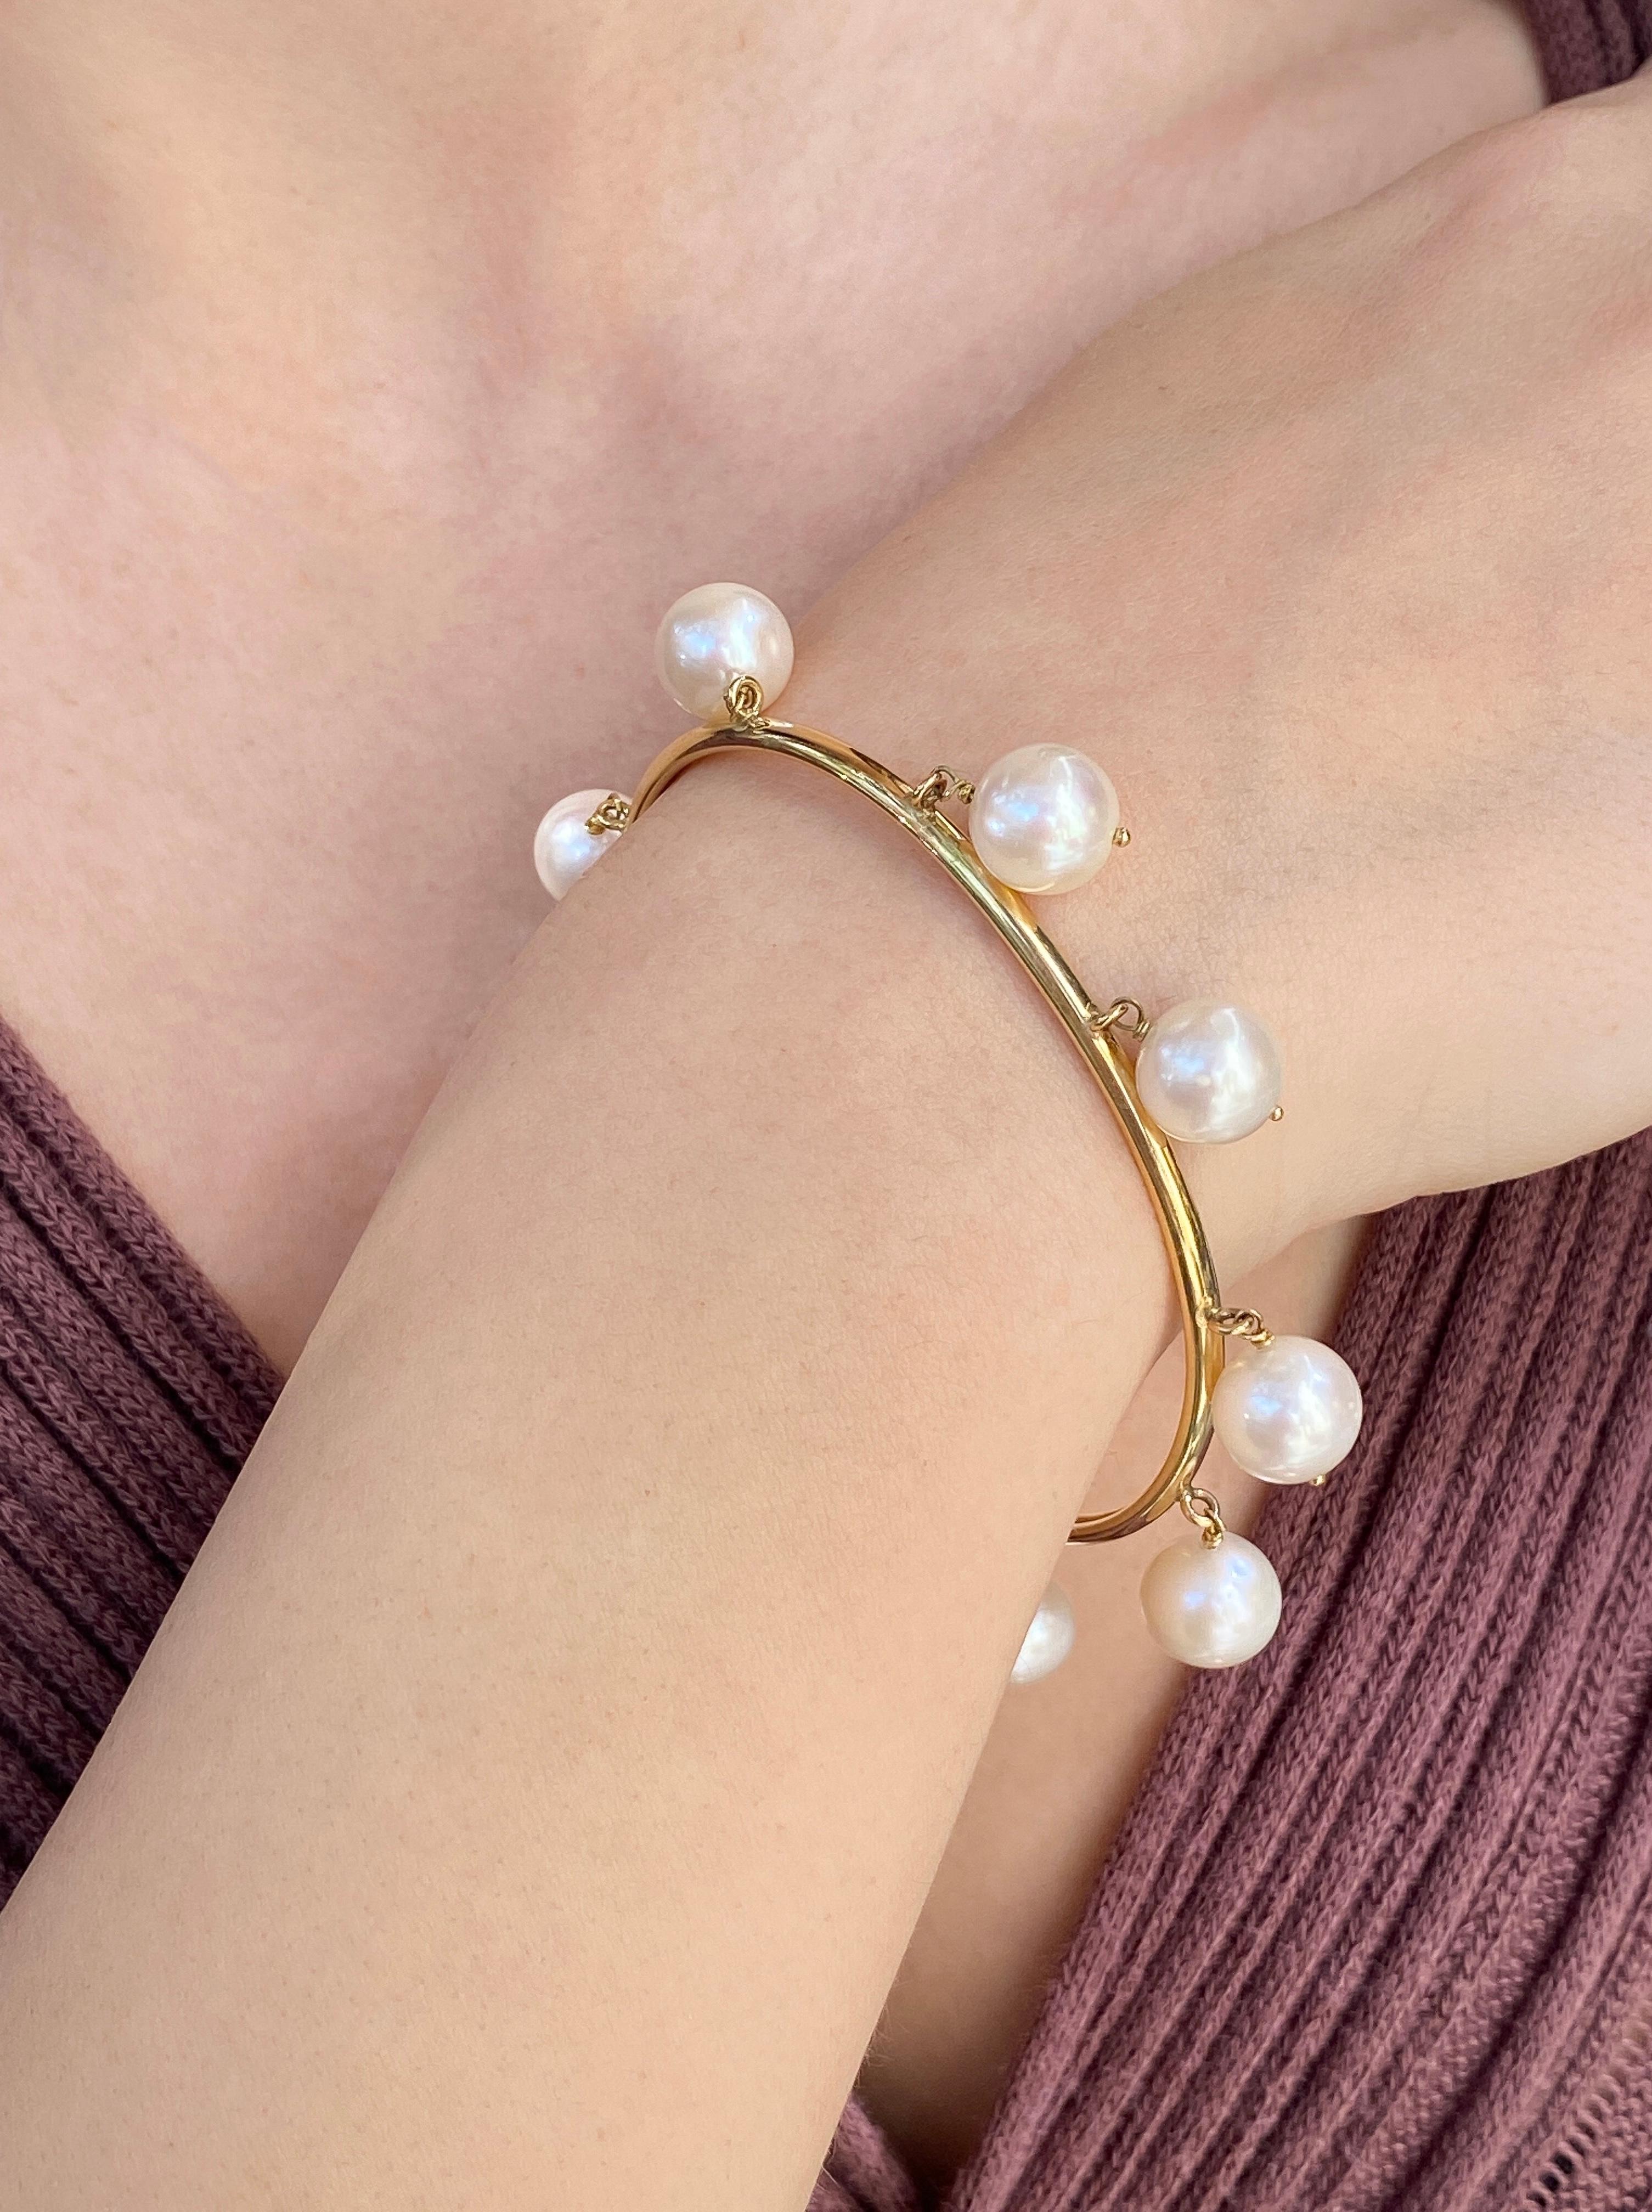 The ‘Droplets’, flexible cuff is crafted in 18K gold hallmarked in Cyprus. This elegant and playful  flexible cuff comes in a highly polished finish and features seven natural freshwater pearls individually threaded and fixed on the body of the cuff